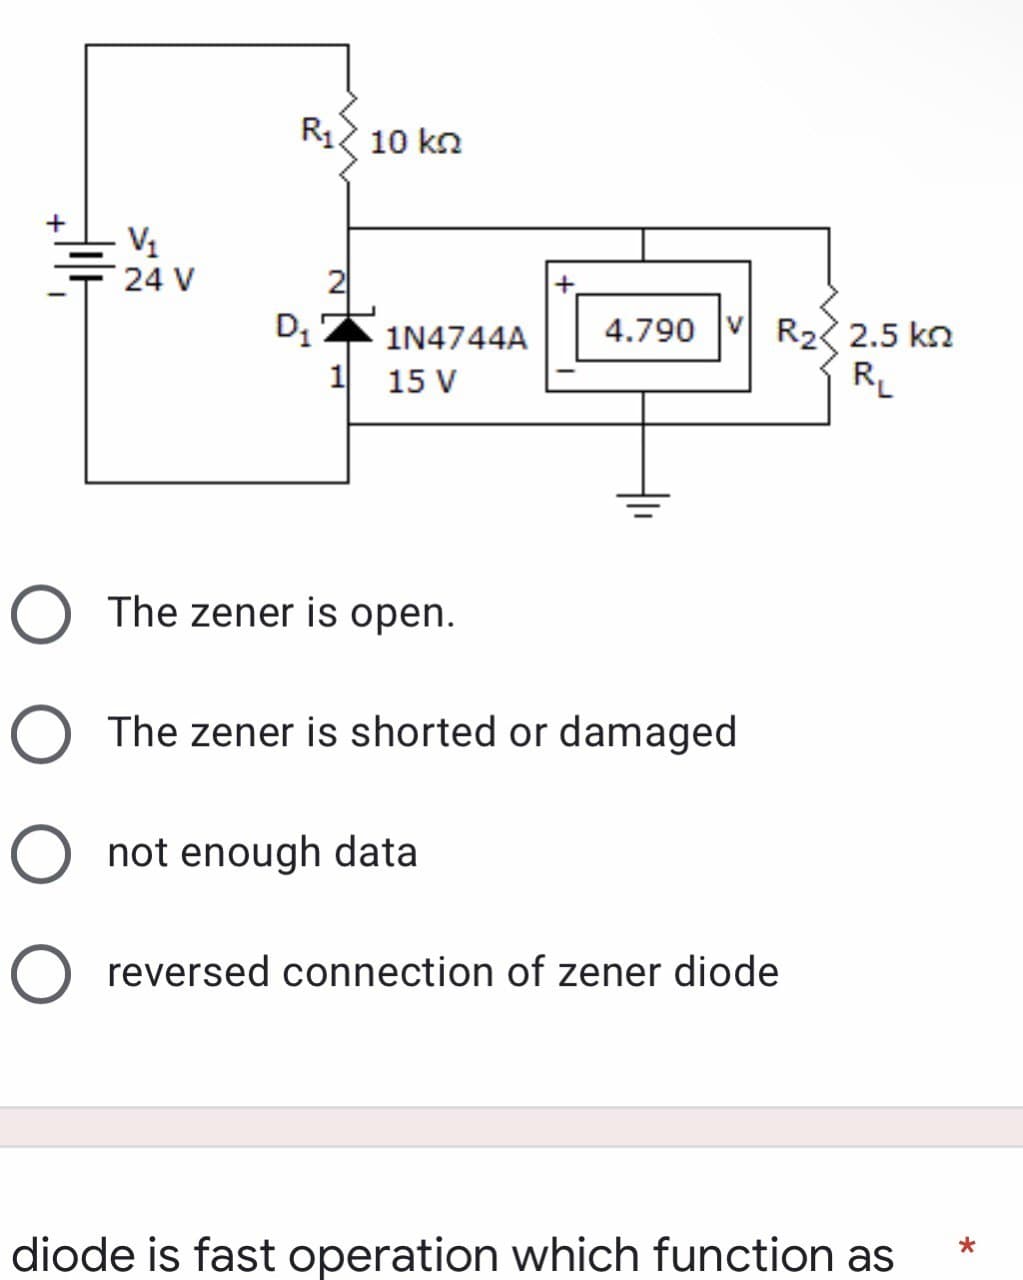 Hill
V₁
24 V
R12 10 ΚΩ
D₁
1N4744A
+
4.790 VR₂2.5 k
R₁
1 15 V
O The zener is open.
O The zener is shorted or damaged
O not enough data
O reversed connection of zener diode
*
diode is fast operation which function as